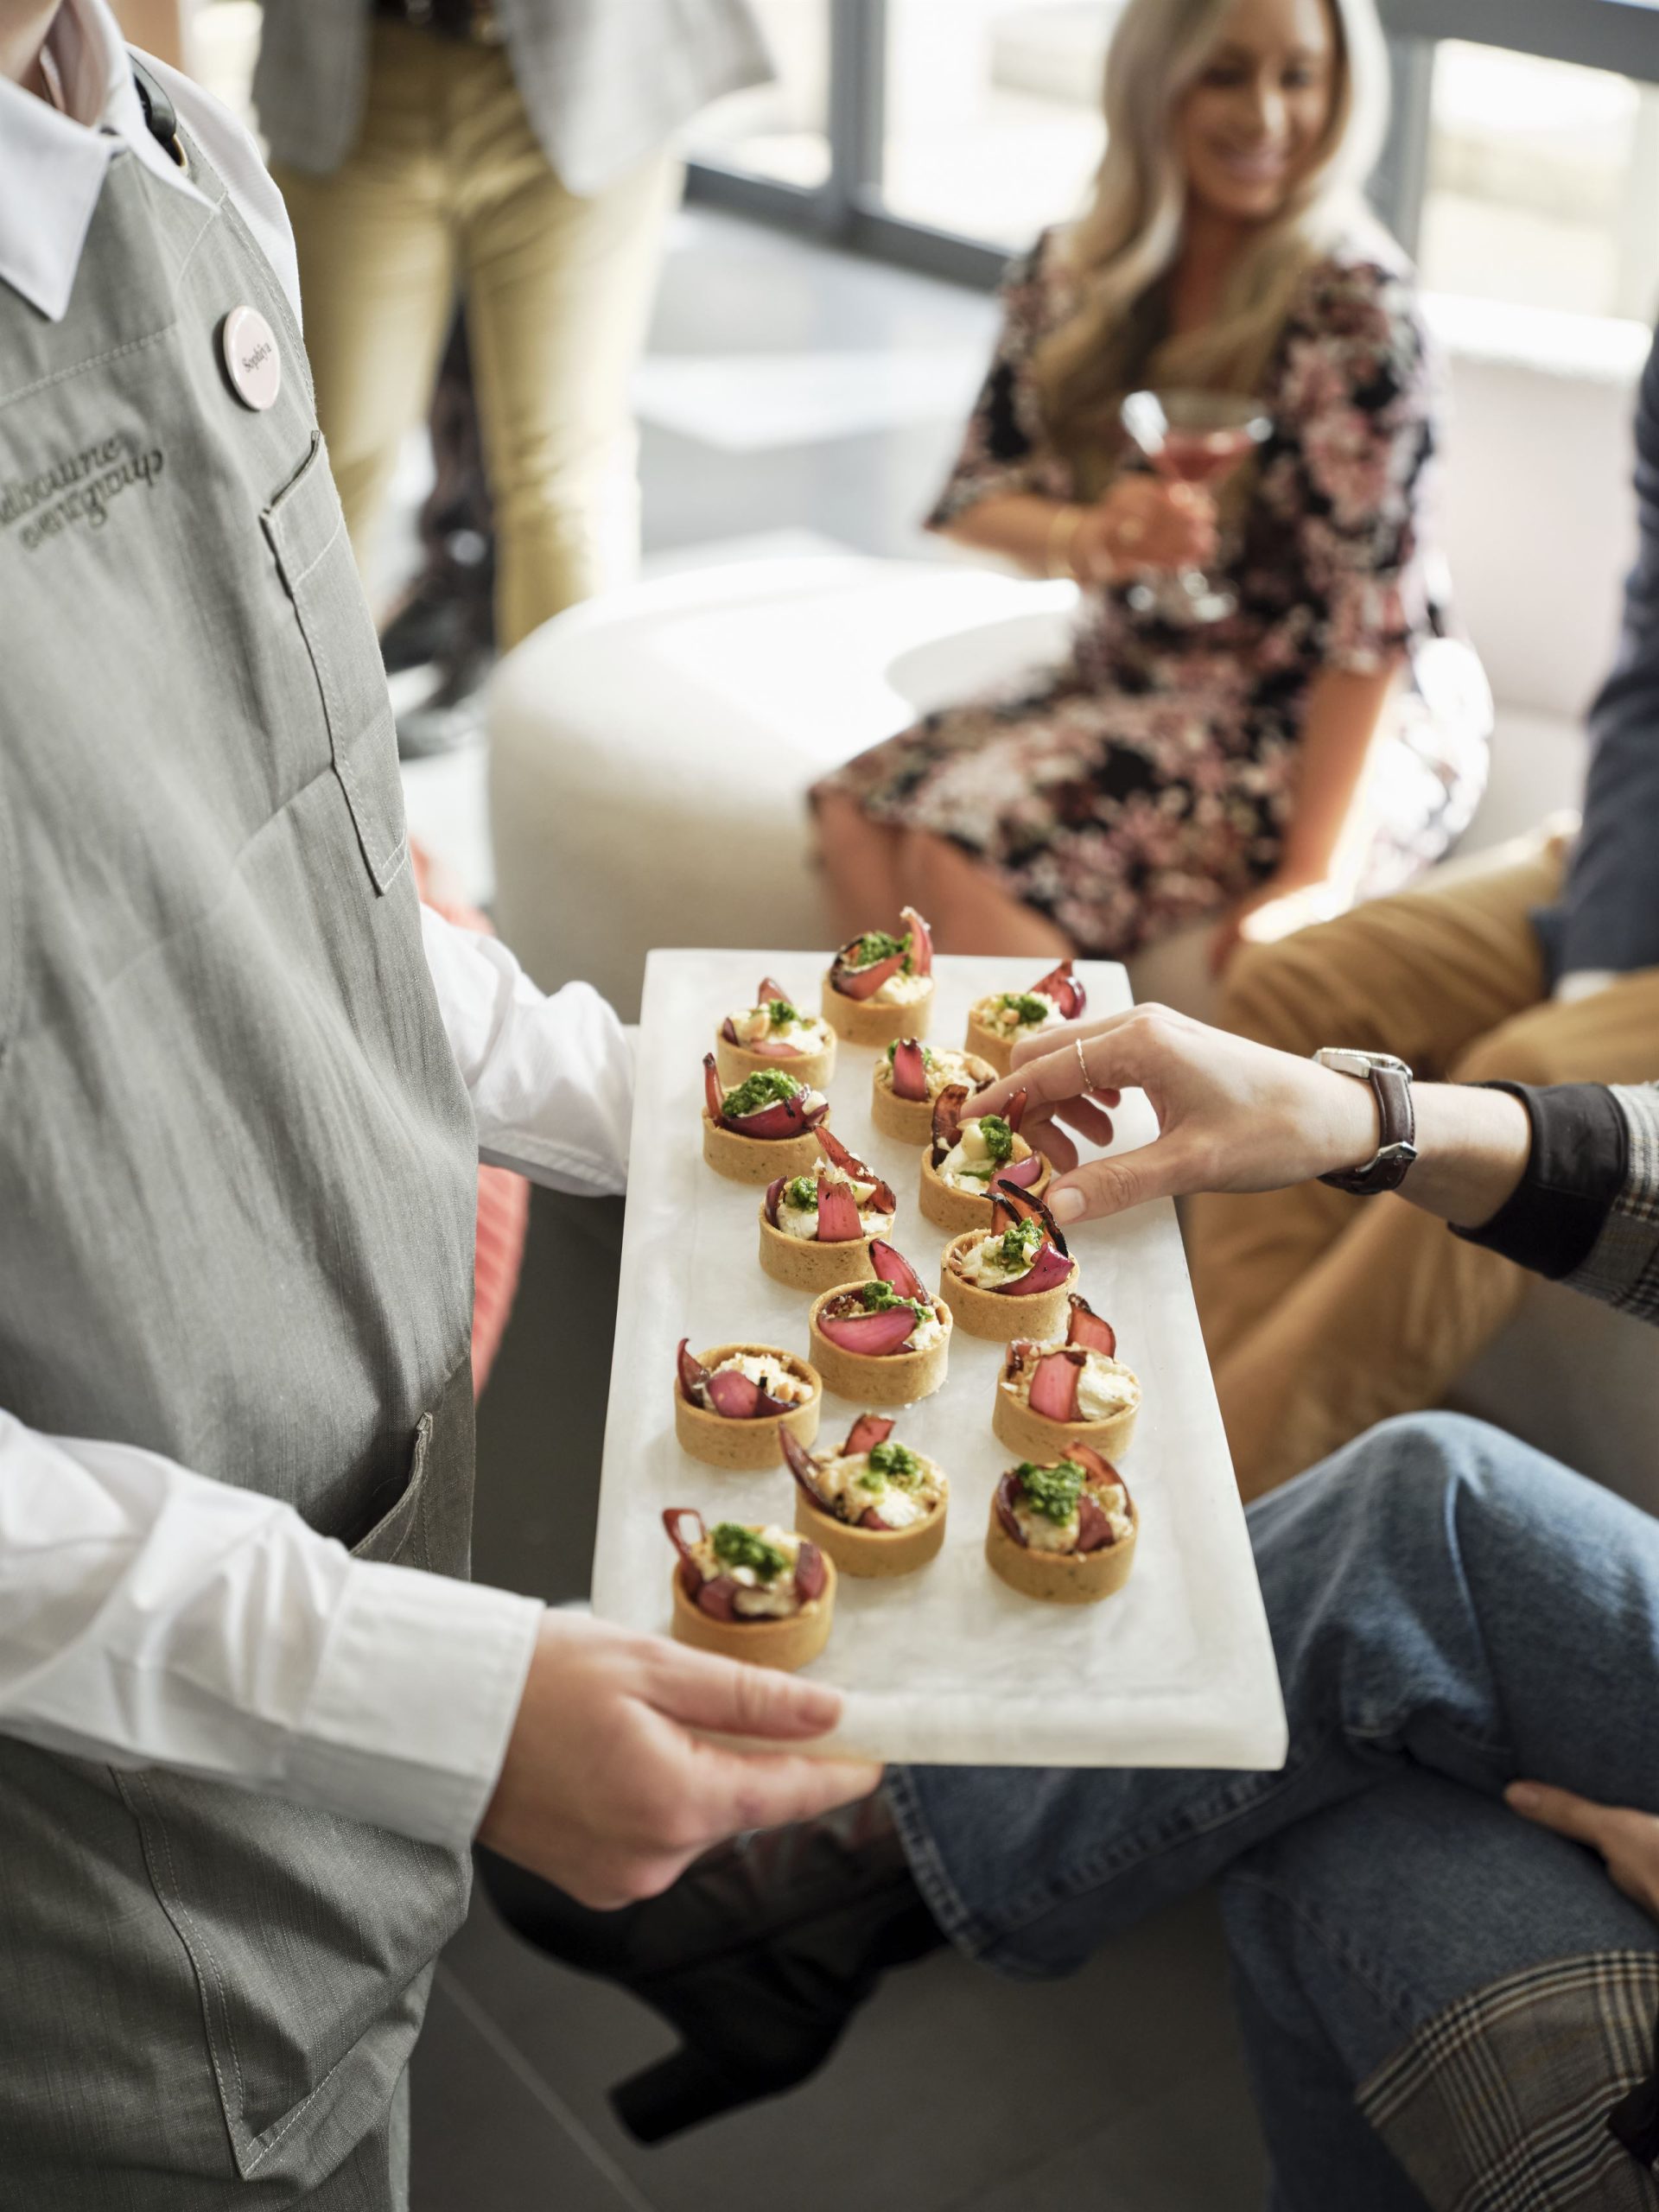 Canapés bar mitzvah venues in Melbourne: A stylish setting for your special occasion. Enjoy delectable bites and celebrate in style.